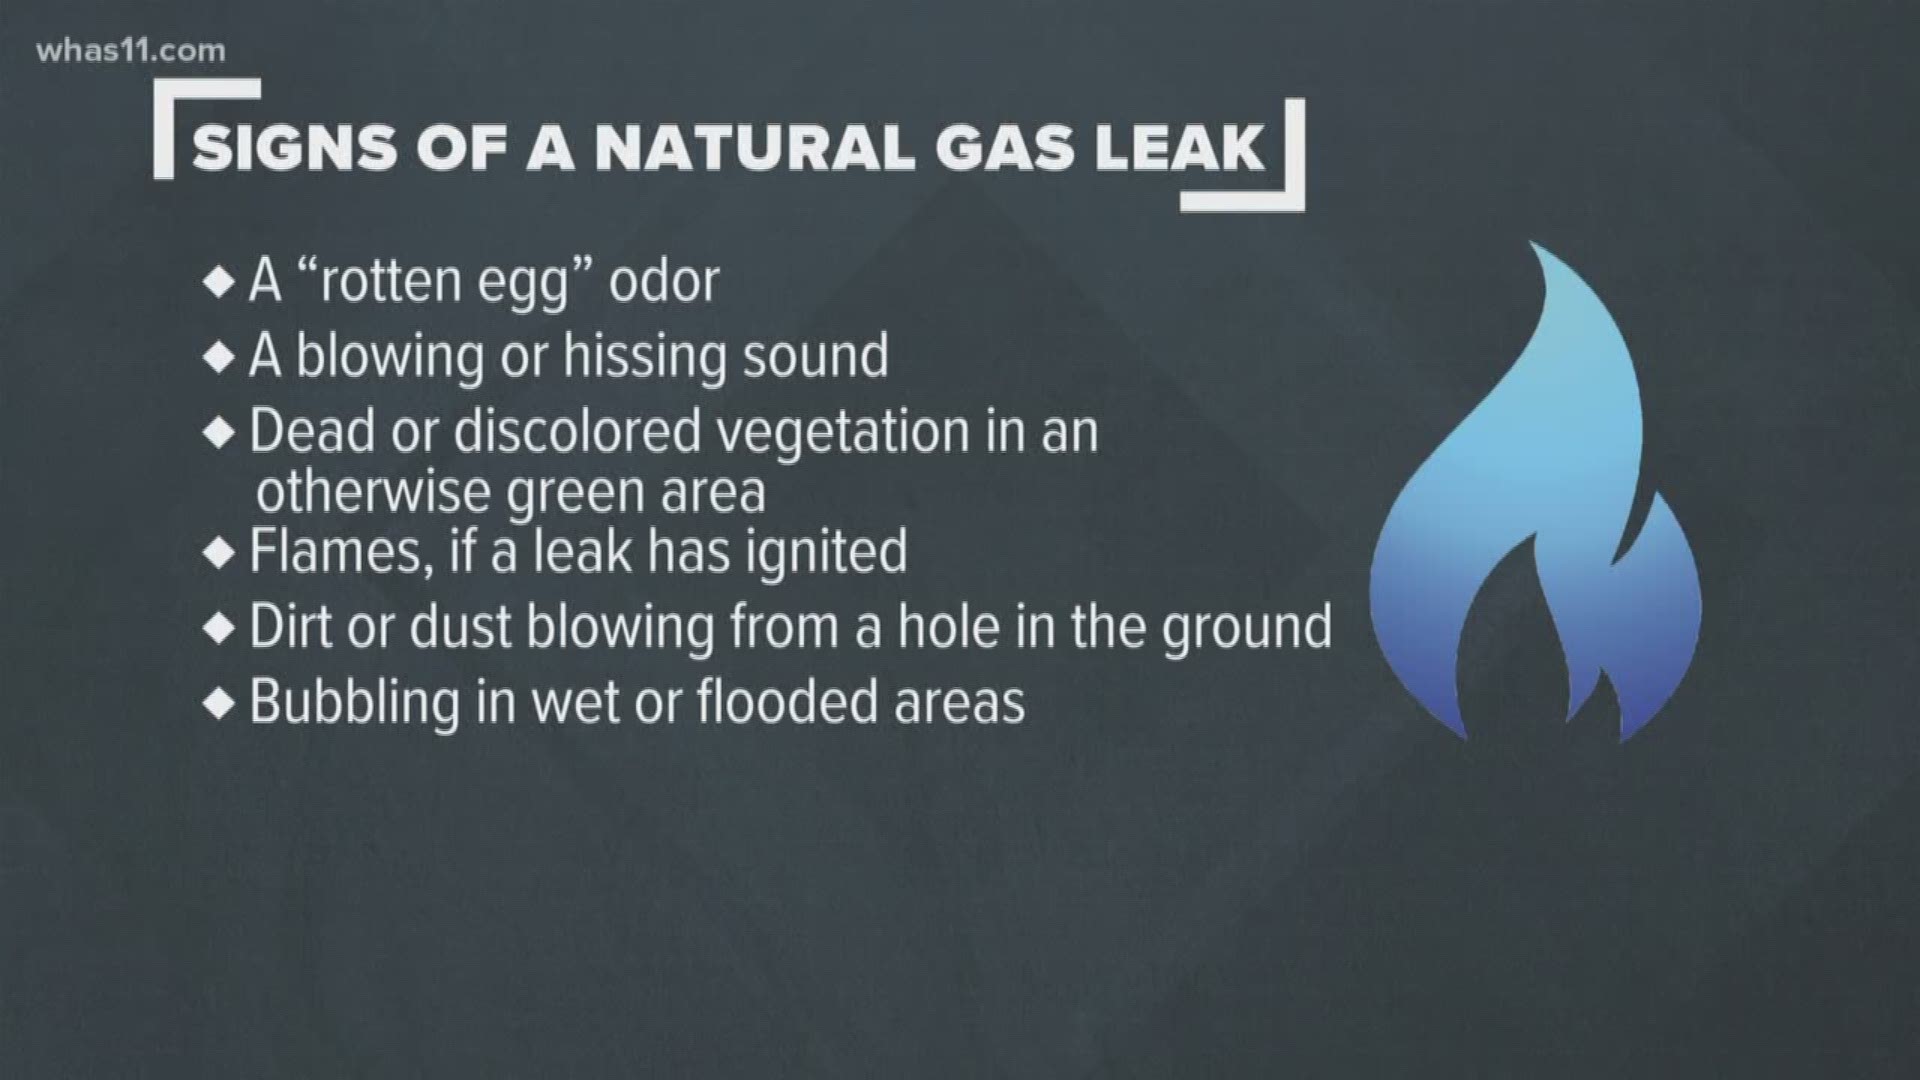 After authorities confirmed a natural gas leak caused the deadly house explosion in Jeffersonville, we looking into how to detect natural gas and prevent a gas leak.